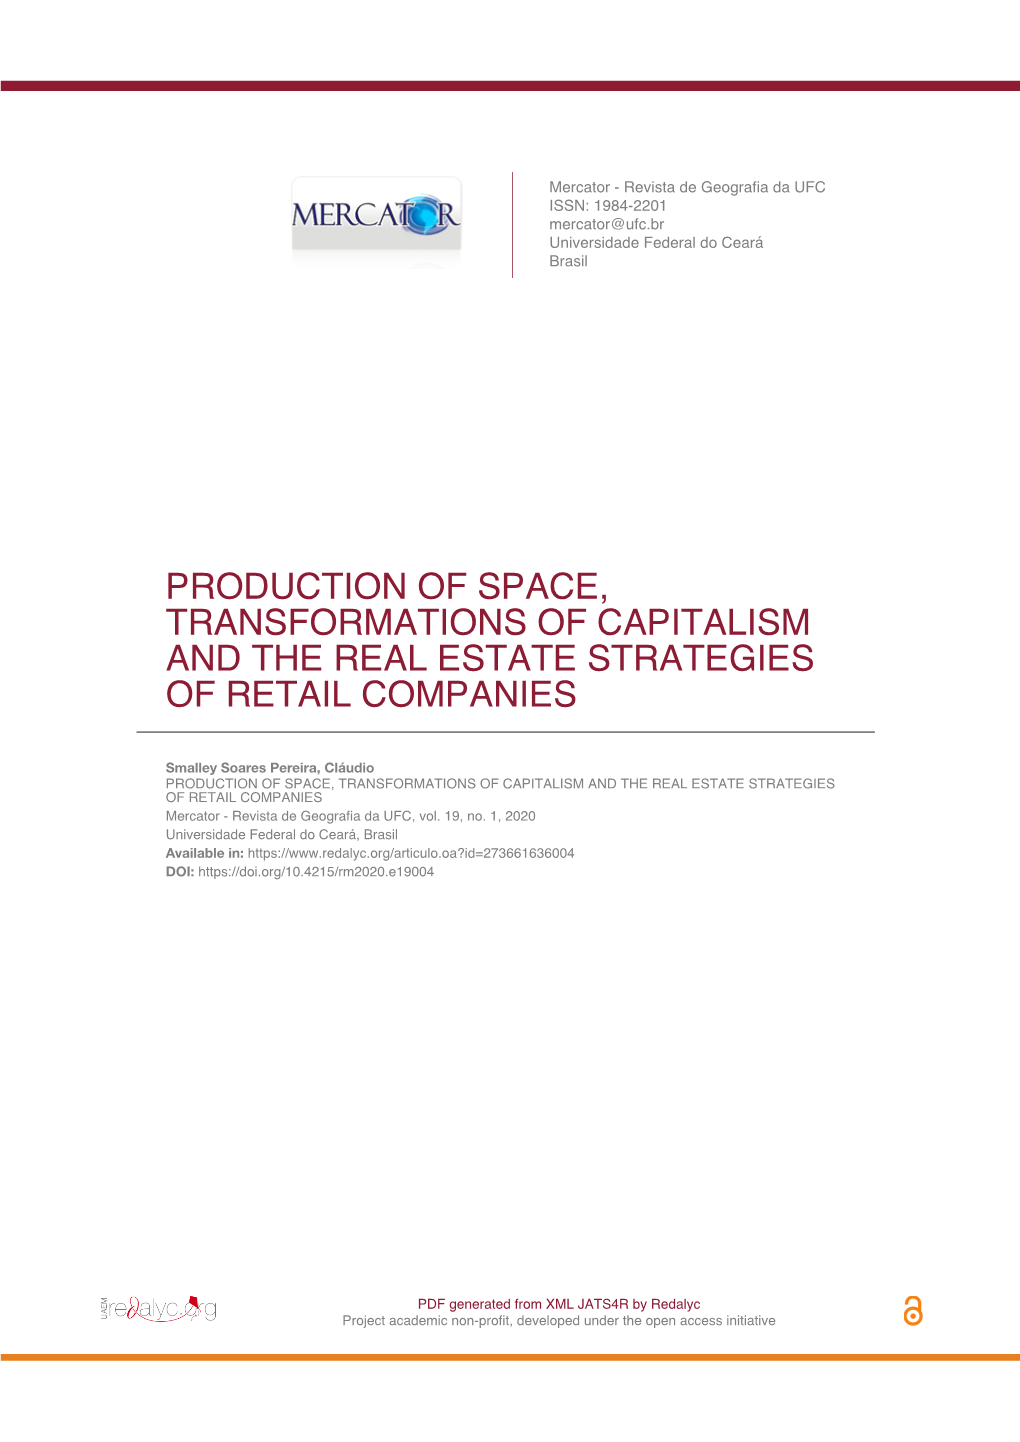 Production of Space, Transformations of Capitalism and the Real Estate Strategies of Retail Companies